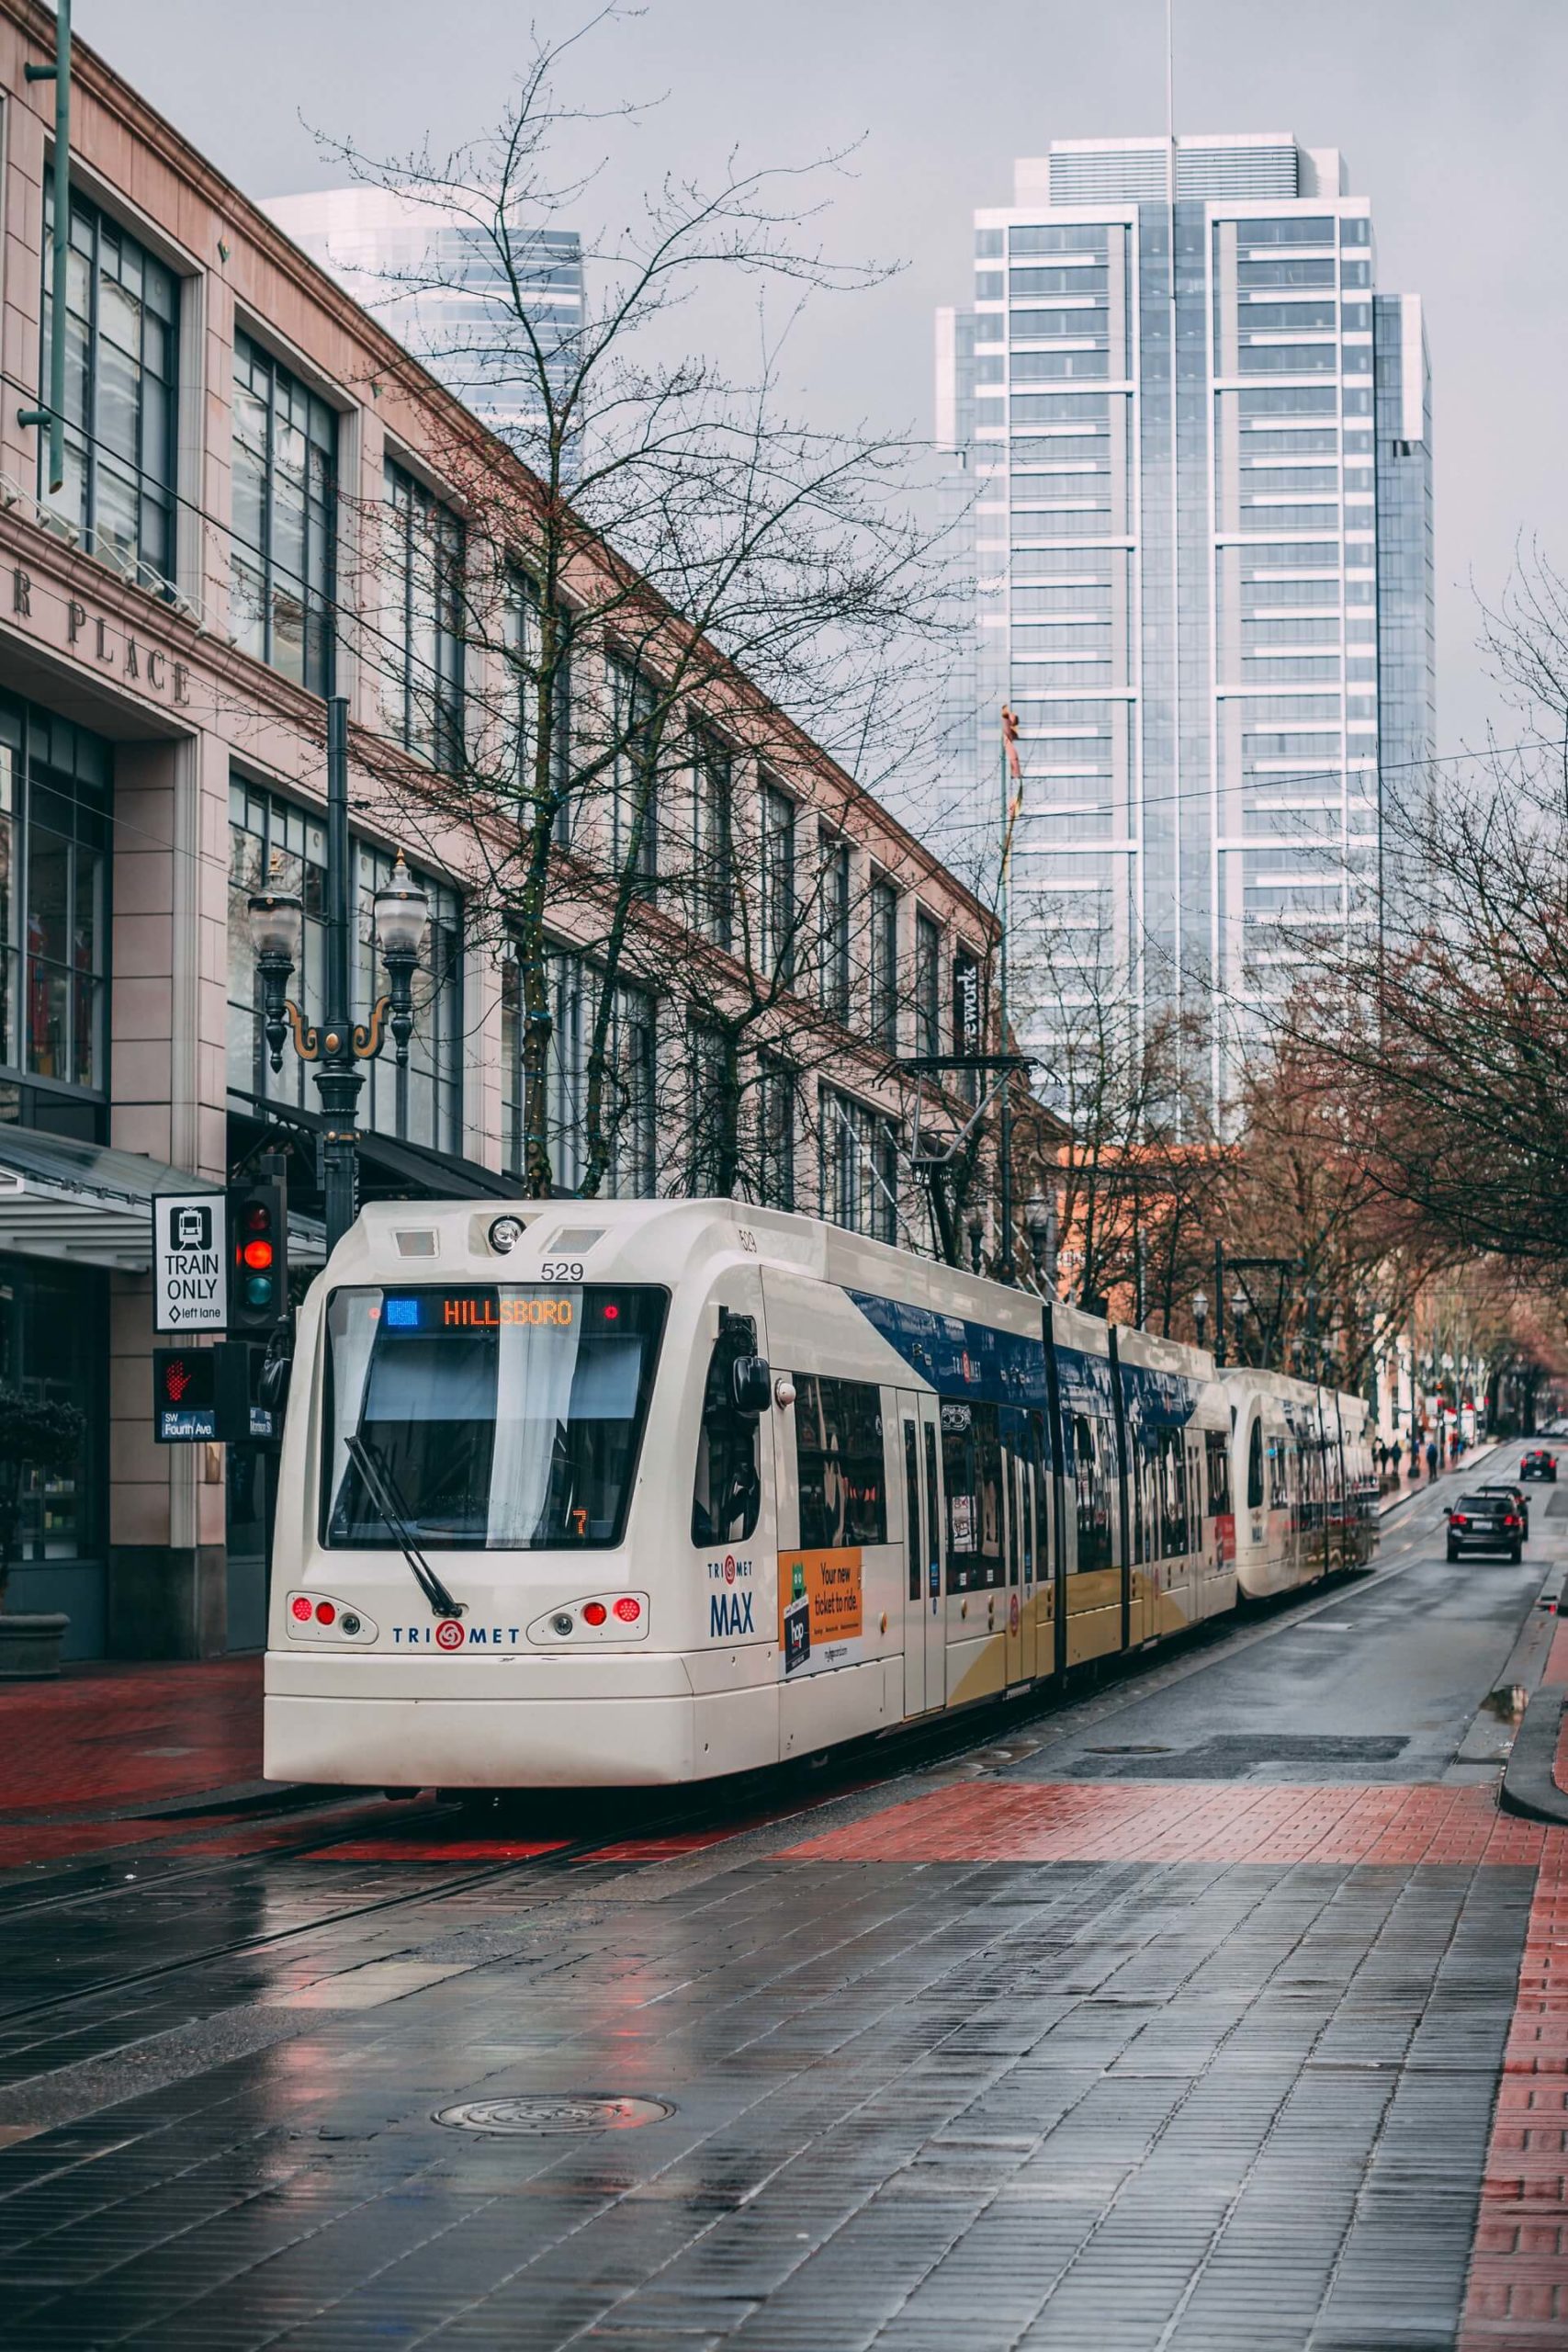 tram pulling up to rainy stop on a cobblestone street in portland